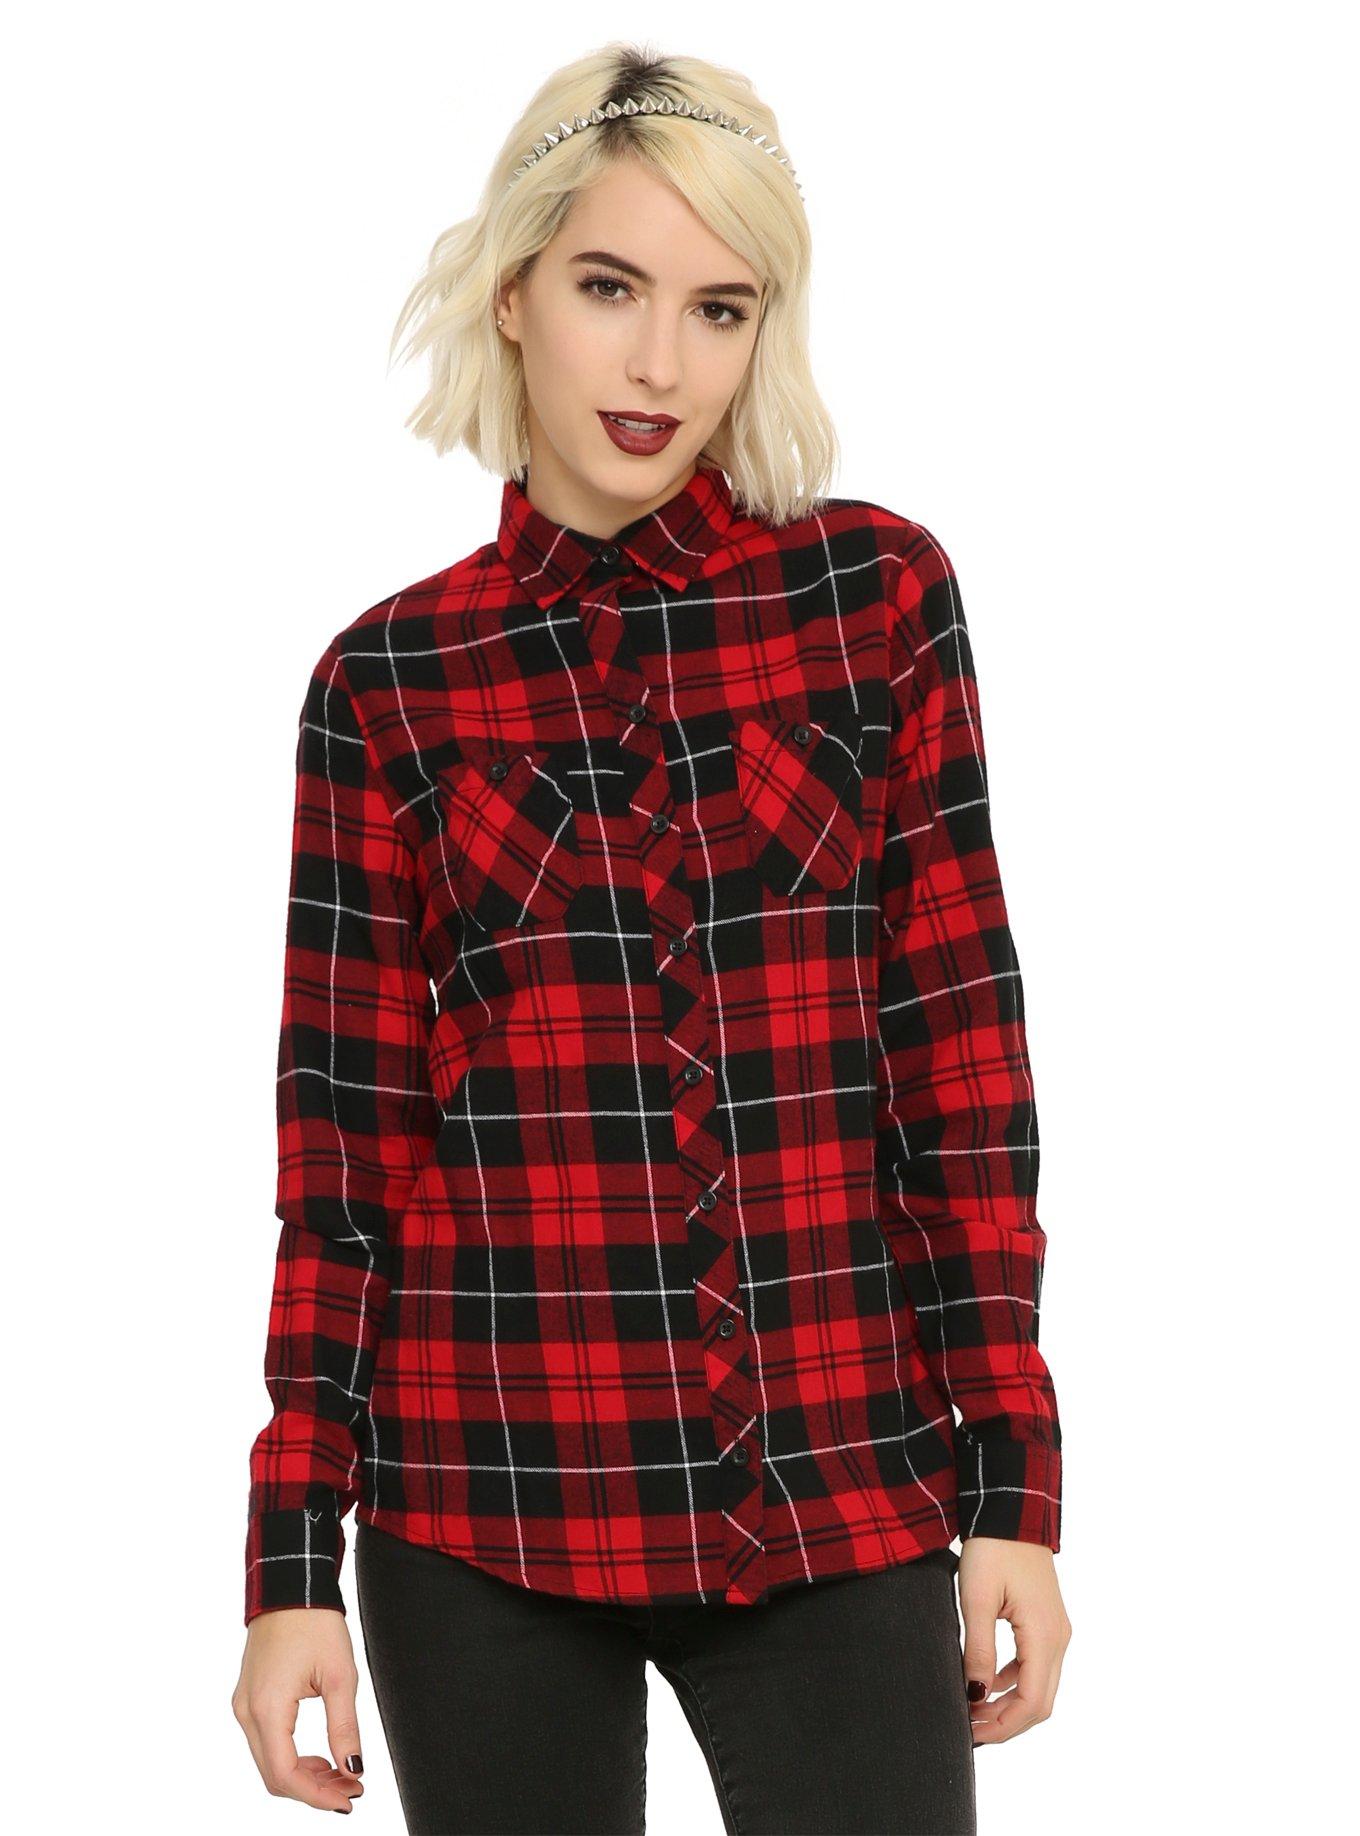 Red Black & White Plaid Woven Button-Up, BLACK, hi-res